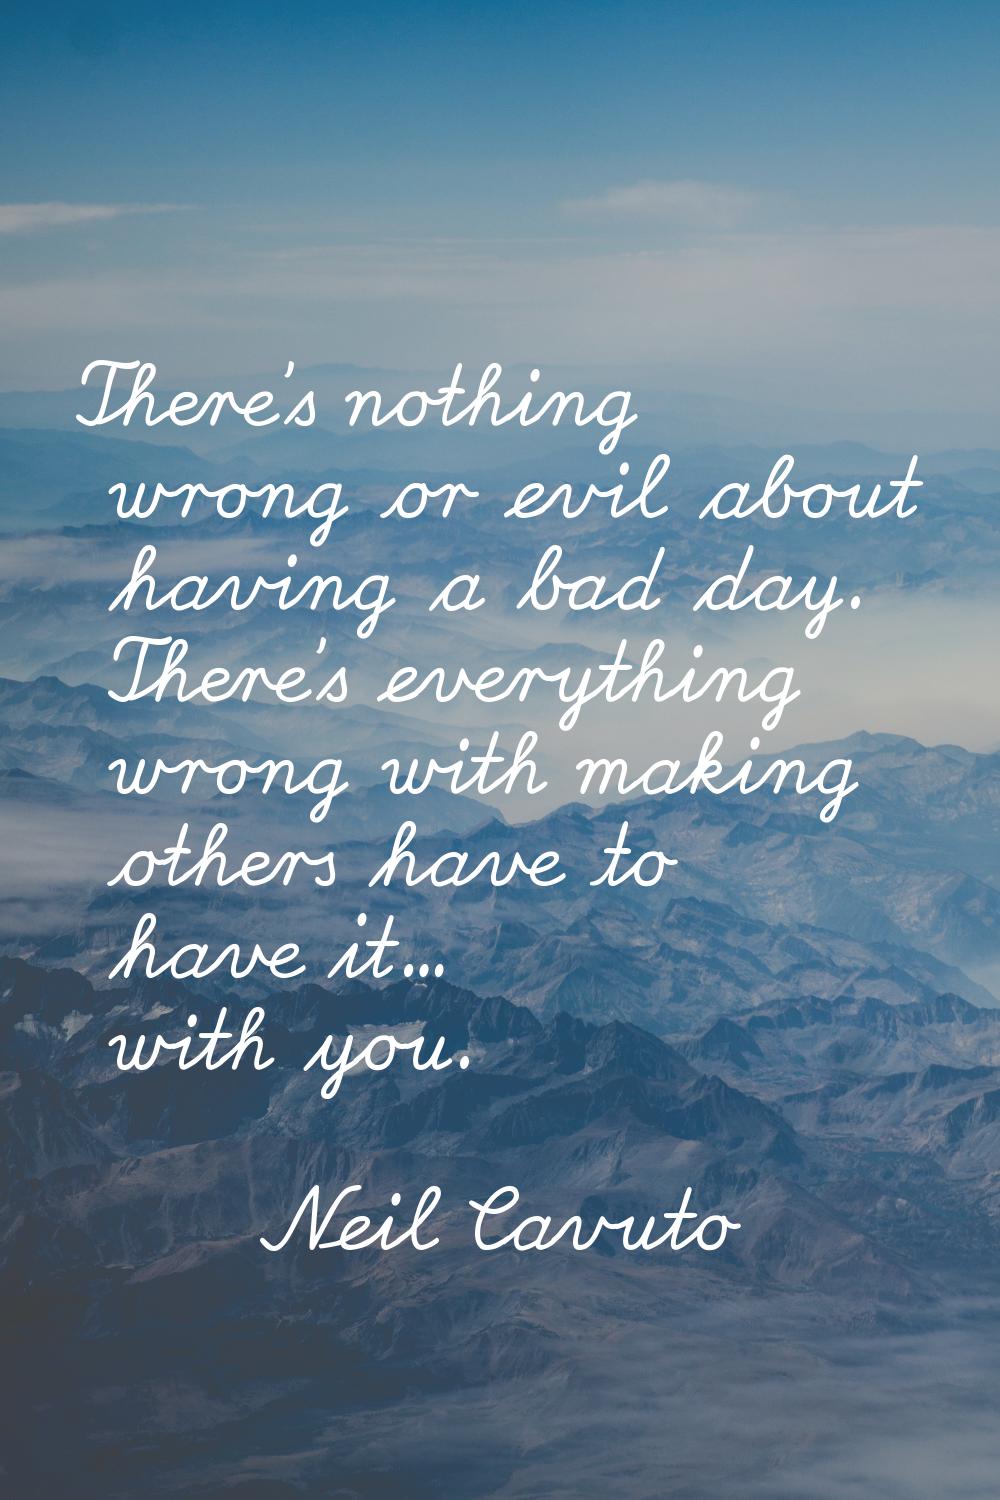 There's nothing wrong or evil about having a bad day. There's everything wrong with making others h